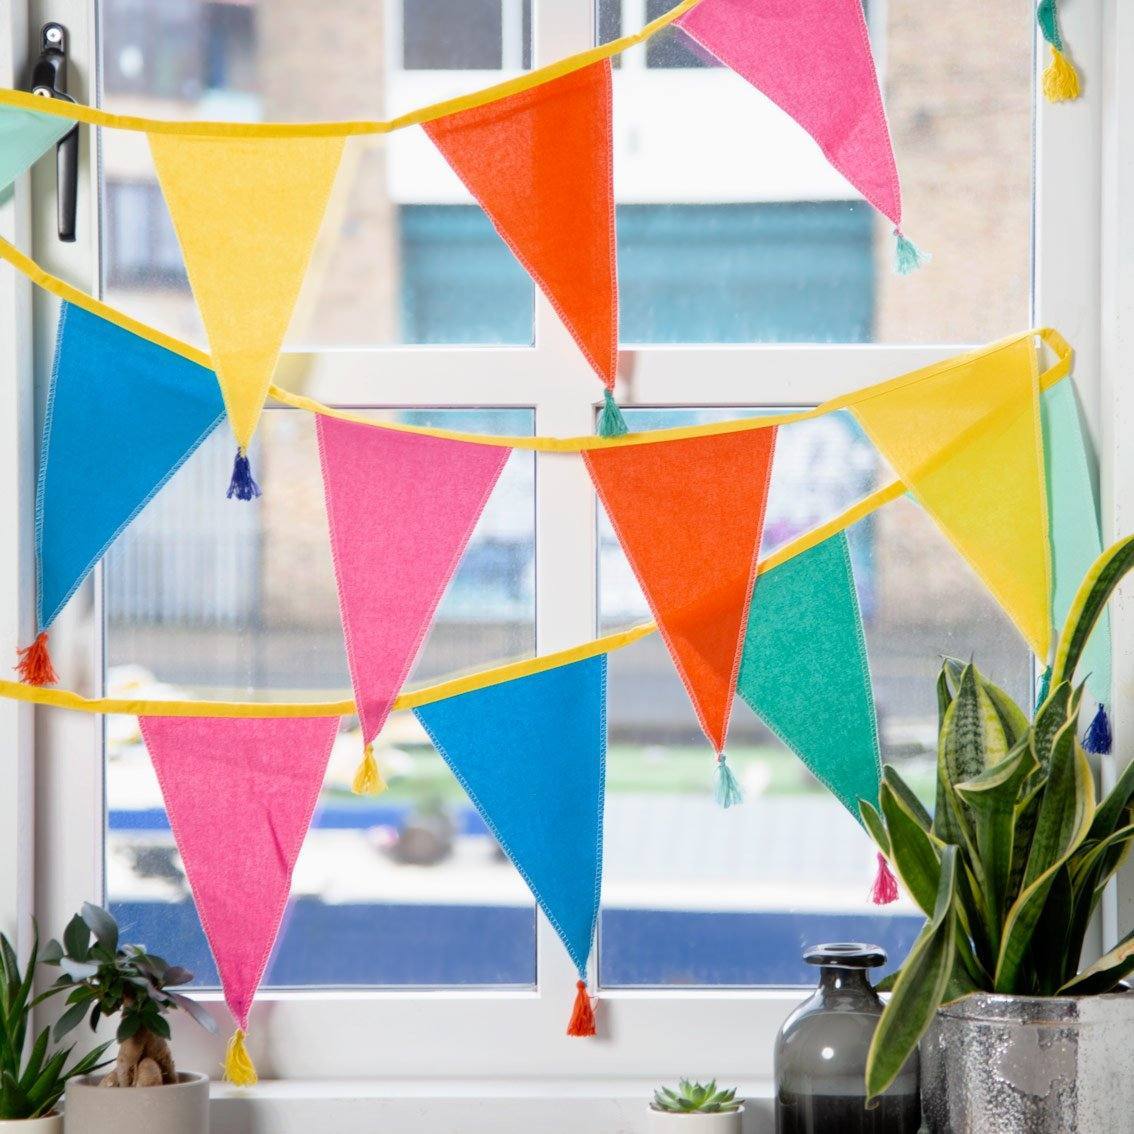 Eco Party Bunting Decorations | Fabric Tassel Bunting - Rainbow Talking Tables